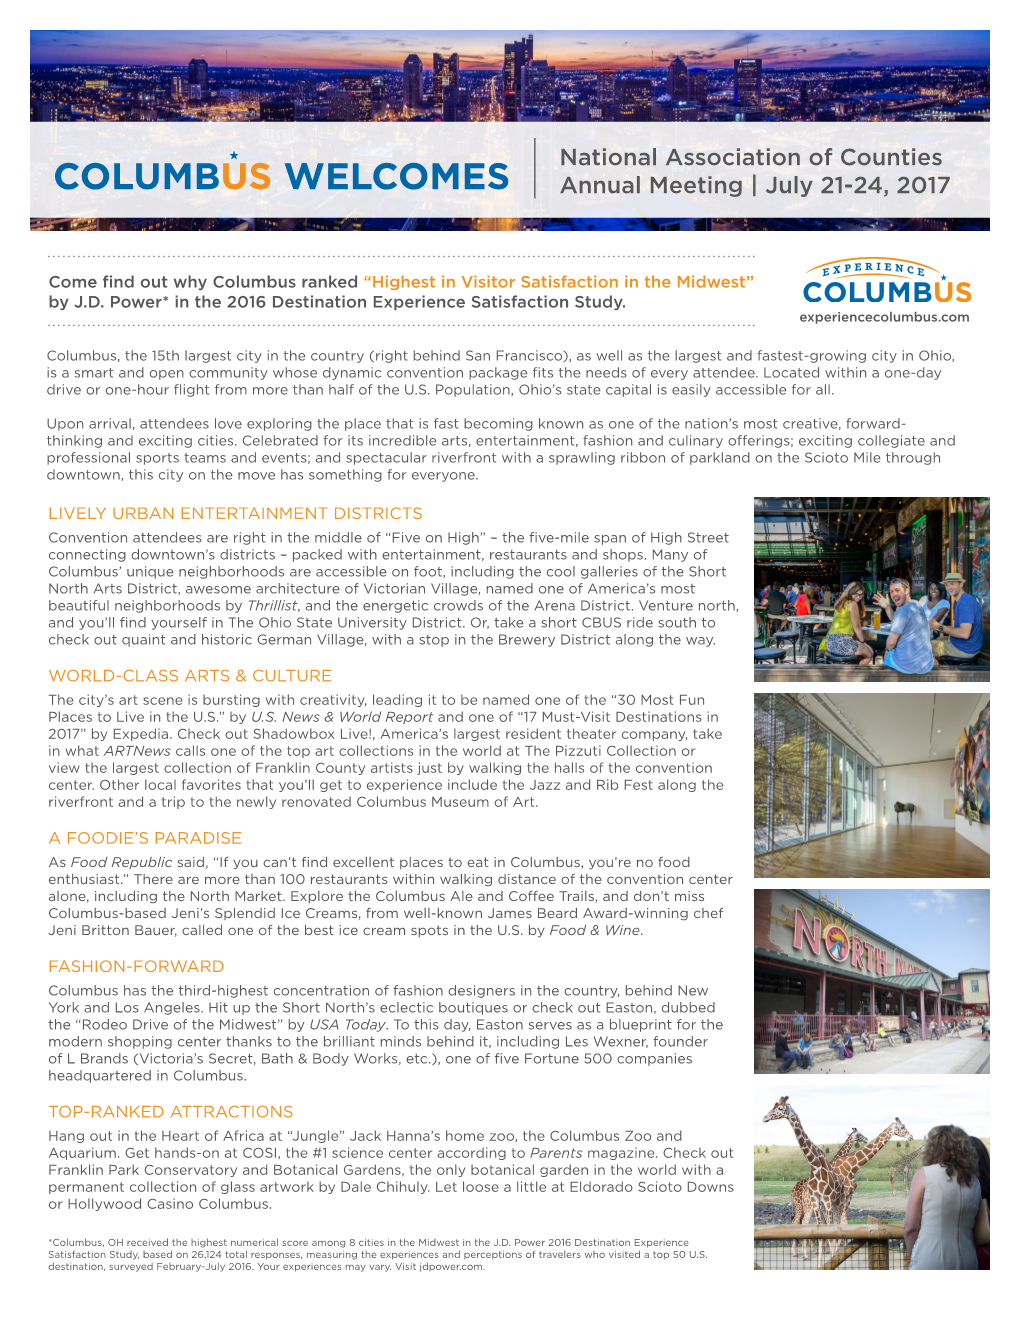 COLUMBUS WELCOMES Annual Meeting | July 21-24, 2017